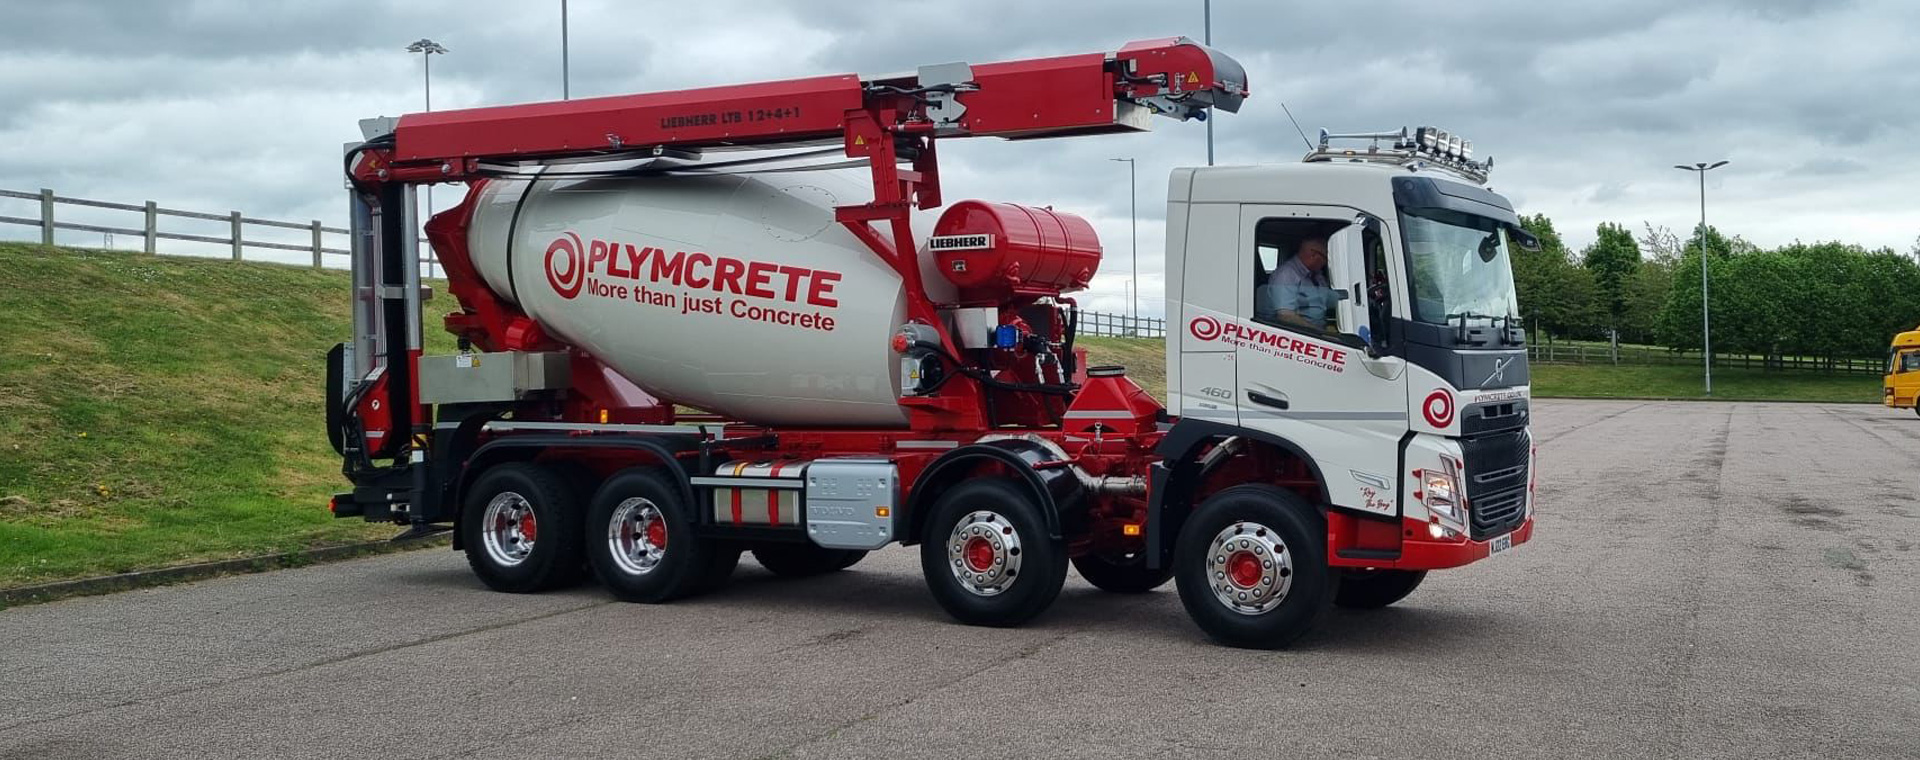 Ready Mix Concrete, Short Notice Concrete Plymouth,  Drum Mix Concrete, from the leading Concrete Supplier in Plymouth Devon and Cornwall, Drum Mix on site Concrete 